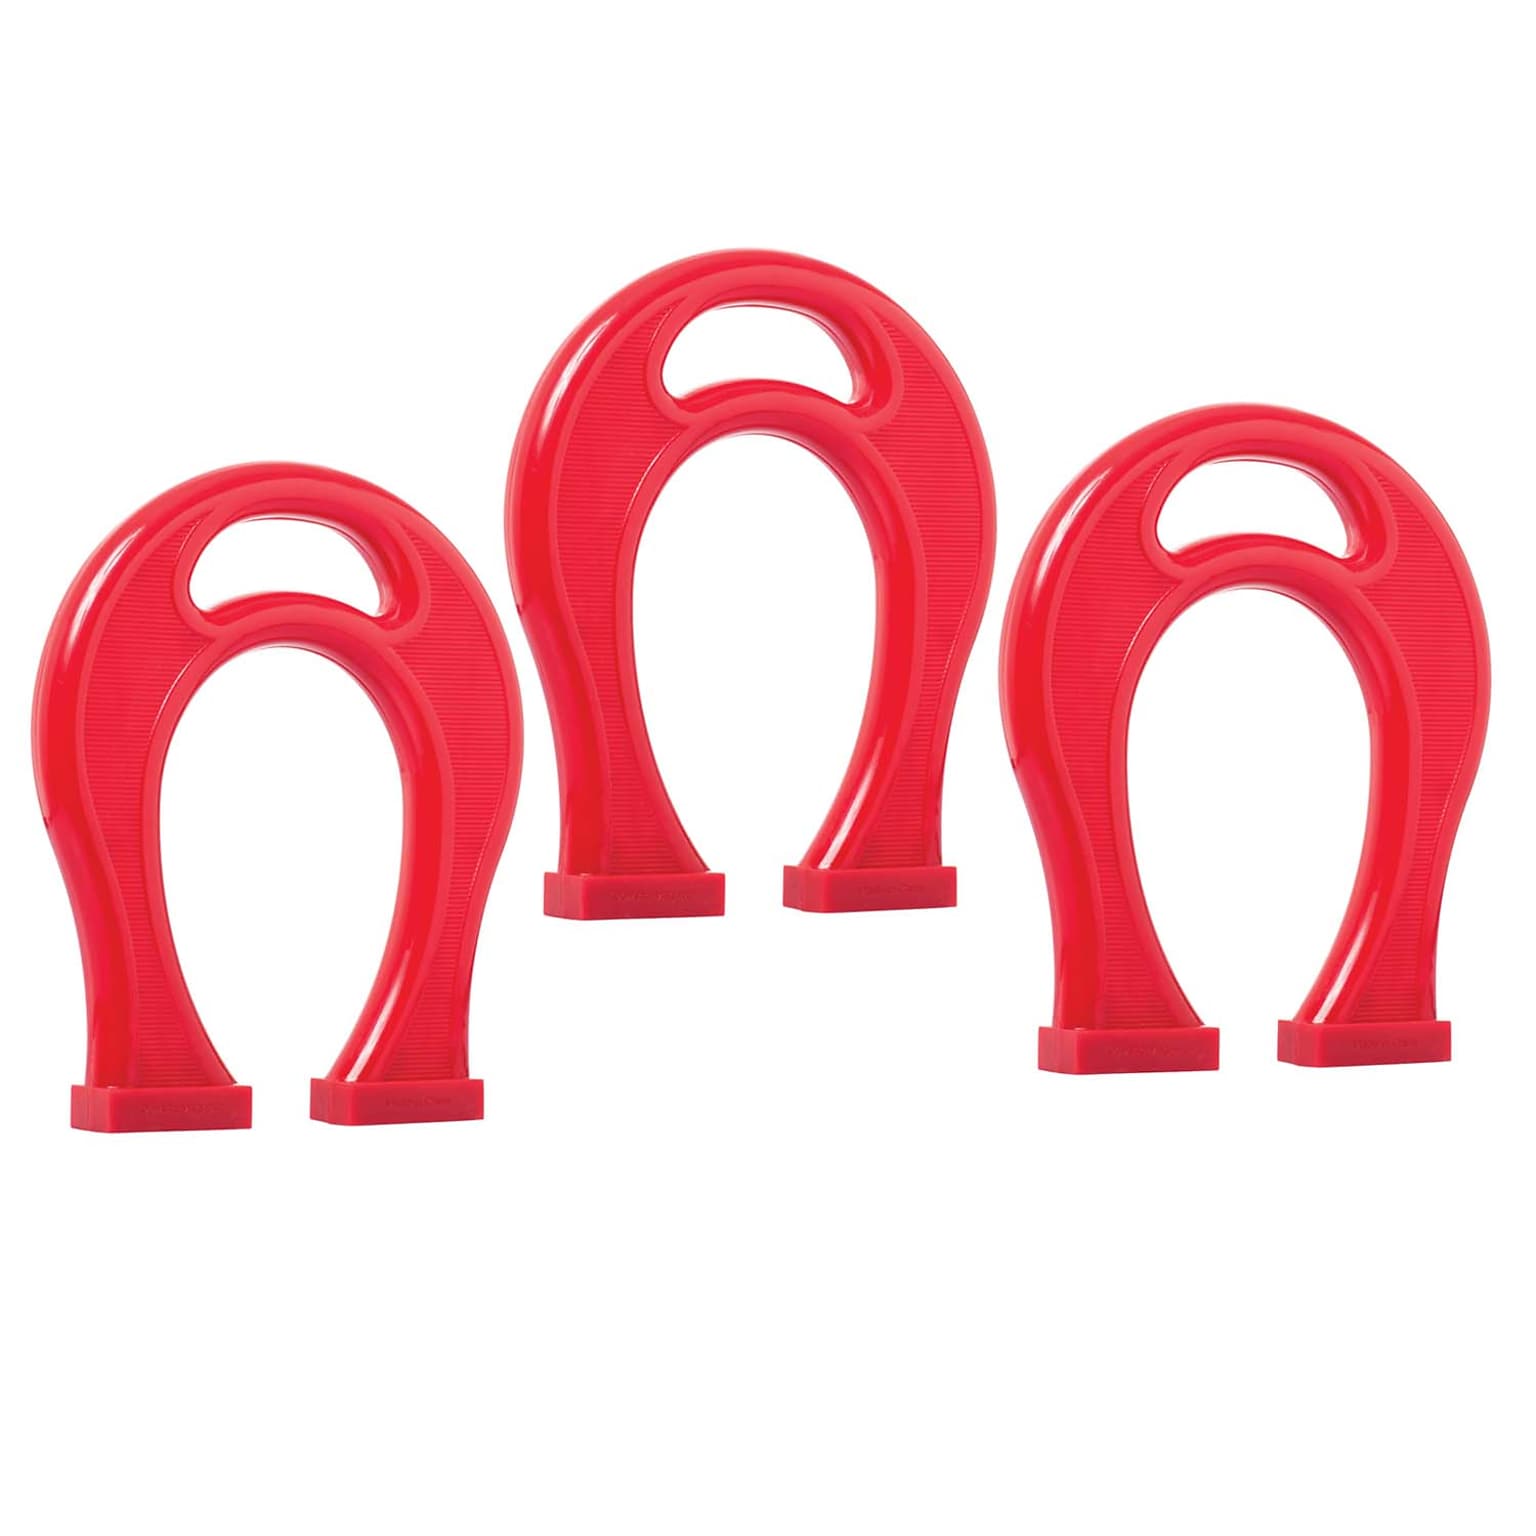 Dowling Magnets® 8 Giant Horseshoe Magnet, Red, Pack of 3 (DO-HS01-3)